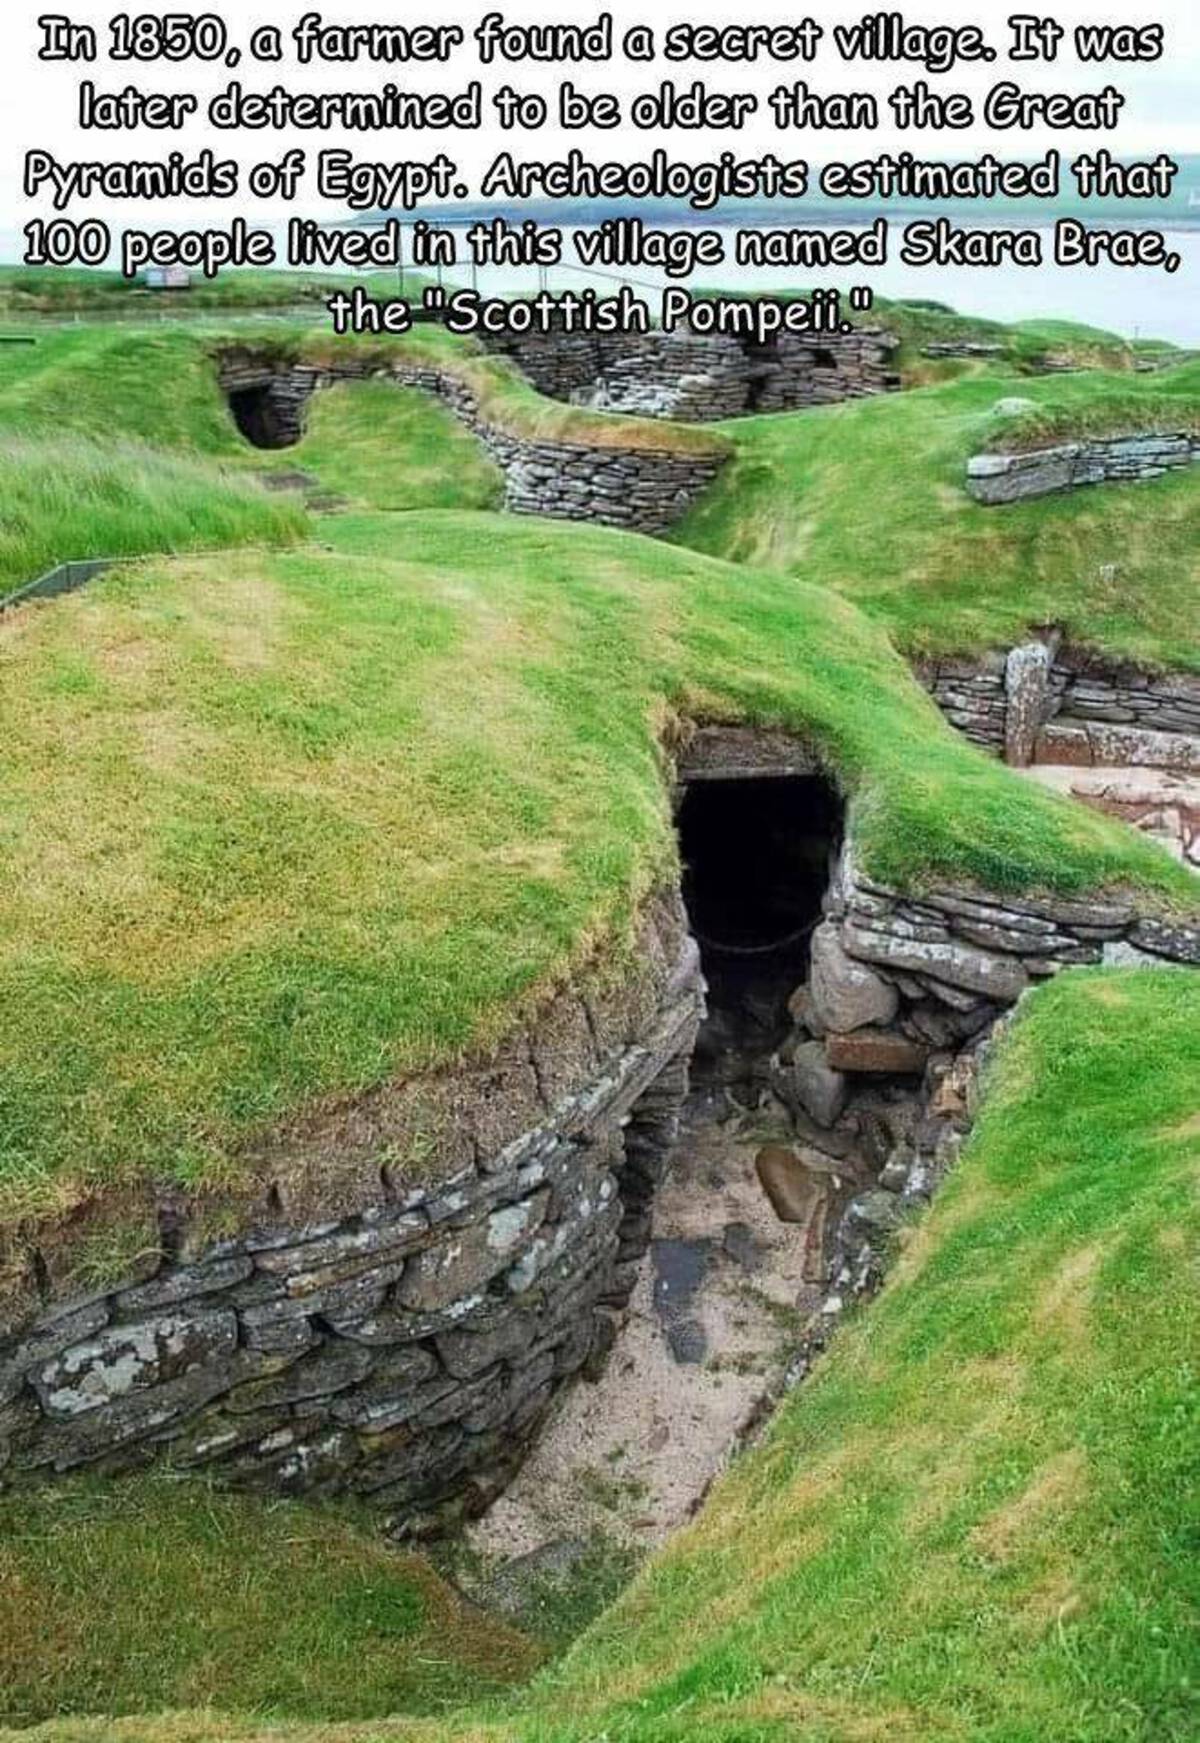 grass - In 1850, a farmer found a secret village. It was later determined to be older than the Great Pyramids of Egypt. Archeologists estimated that 100 people lived in this village named Skara Brae, the "Scottish Pompeii.